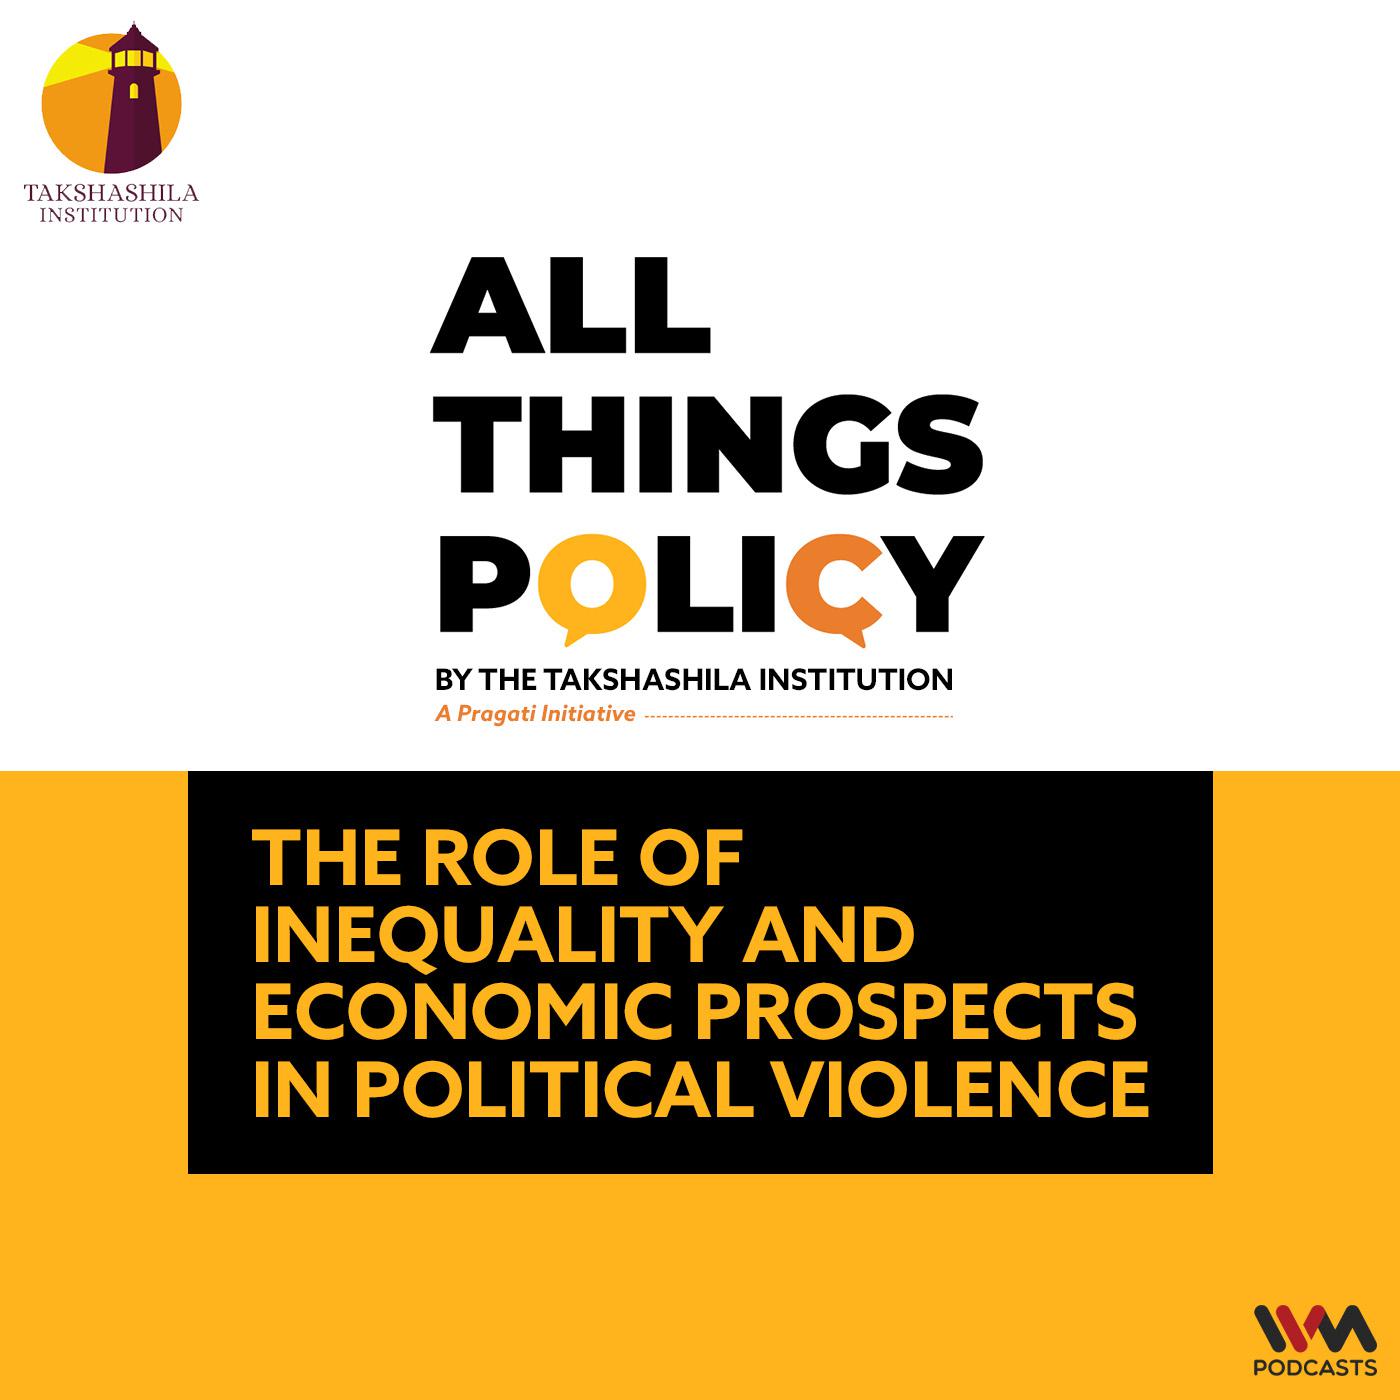 The role of inequality and economic prospects in political violence